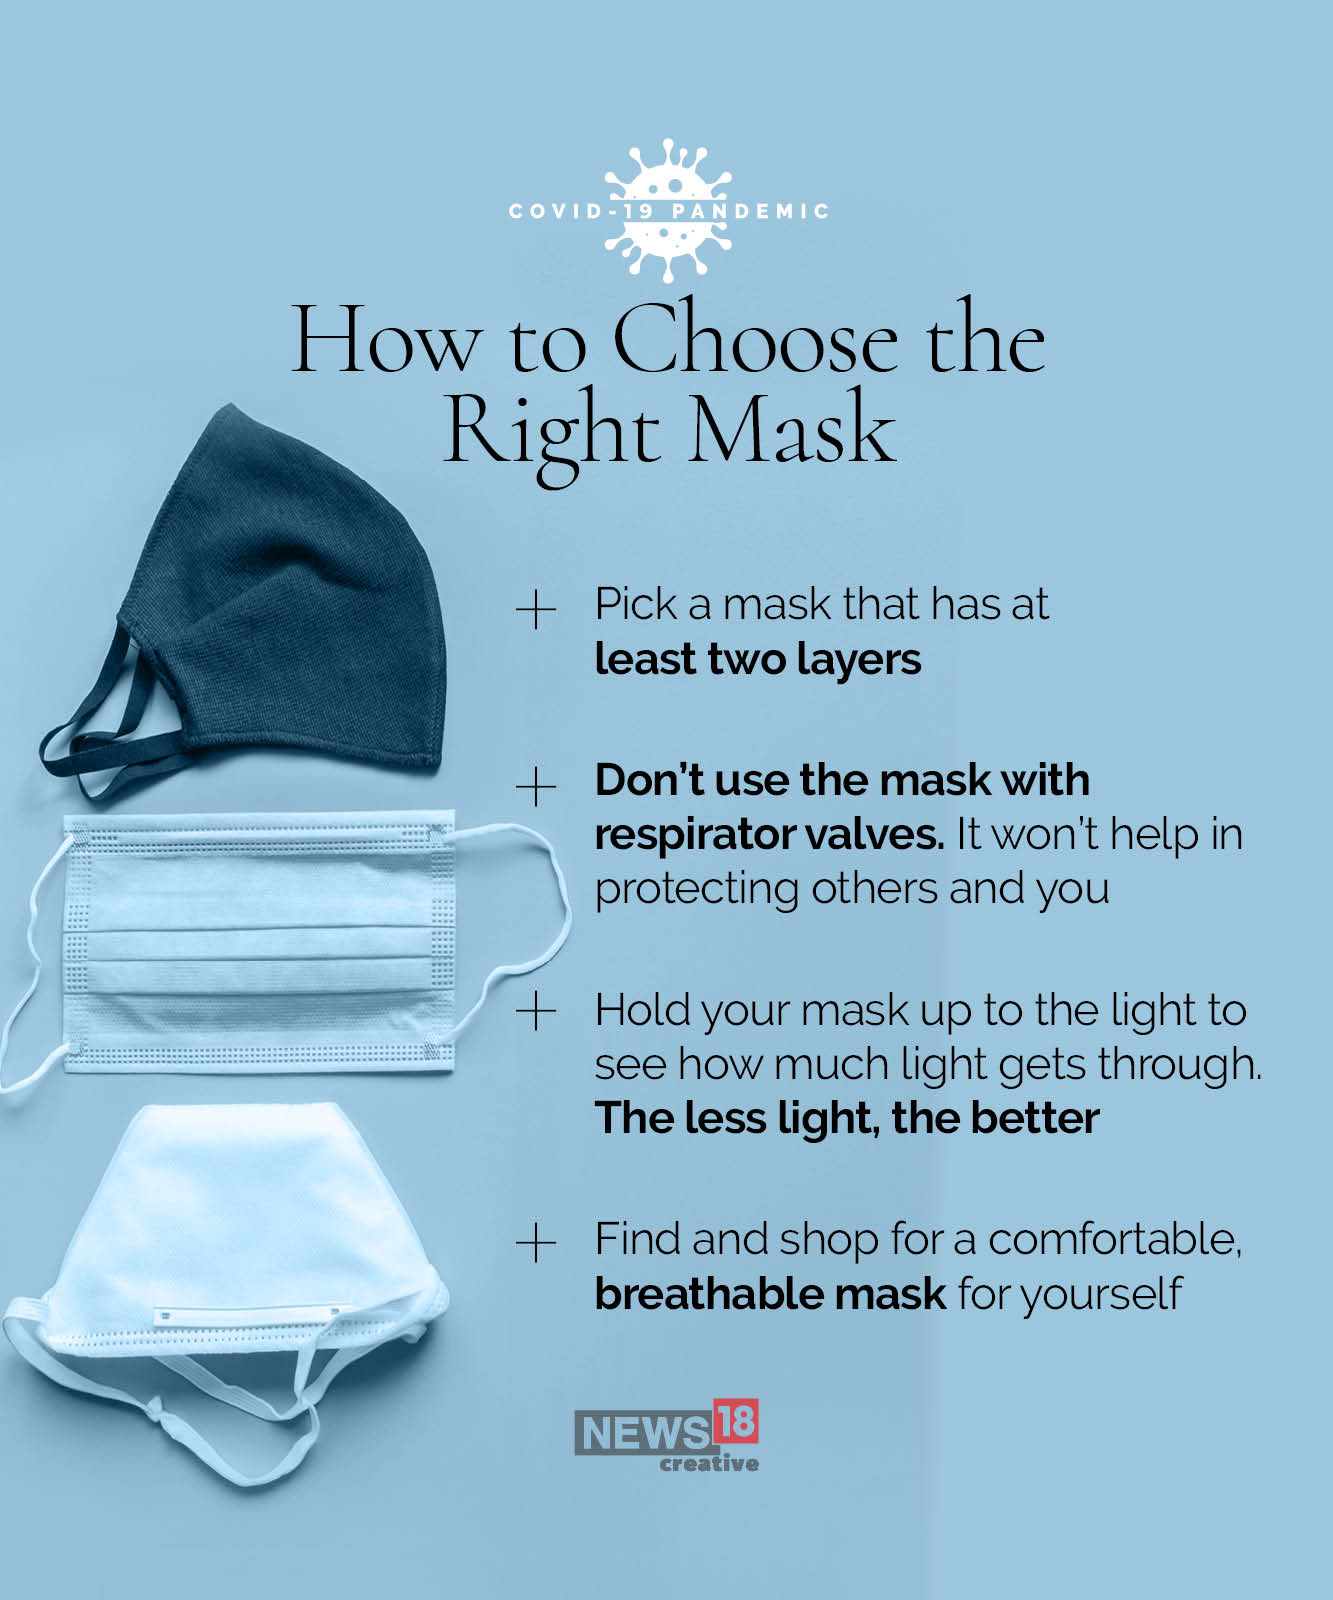 Make your mask work better, and longer